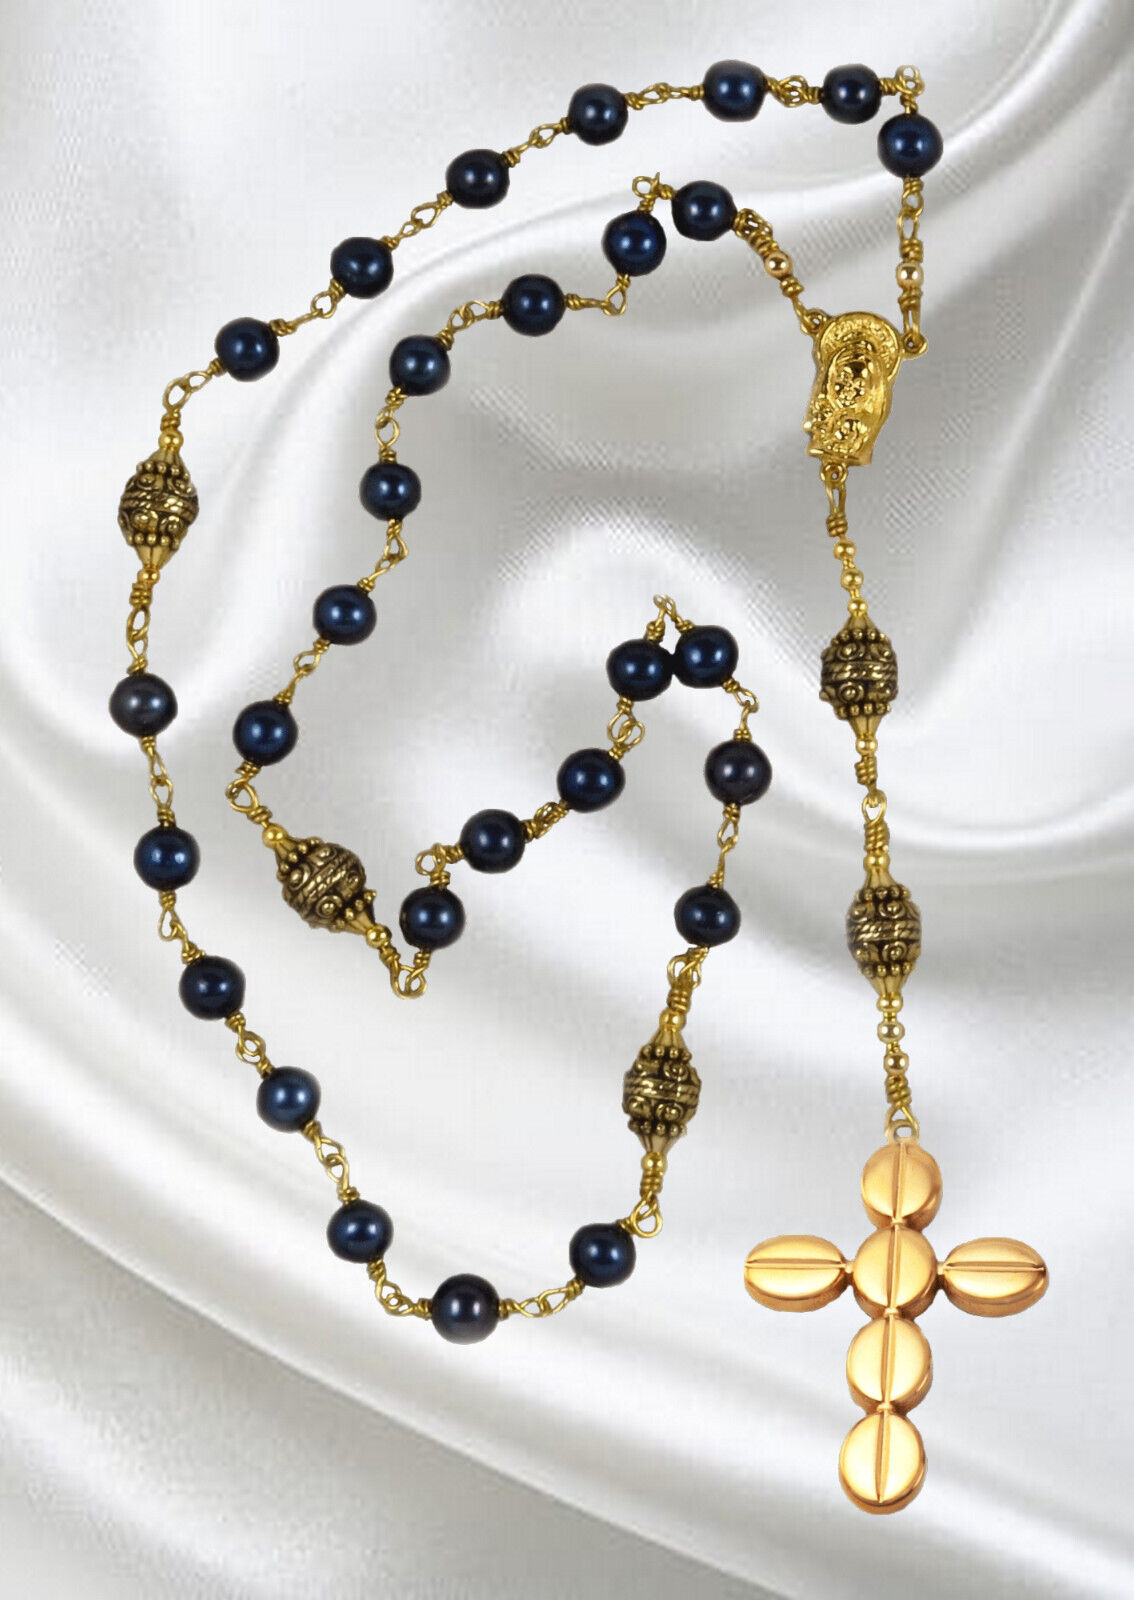 Unbreakable Handmade Anglican Rosary, Deep Blue Cultured Freshwater Pearls